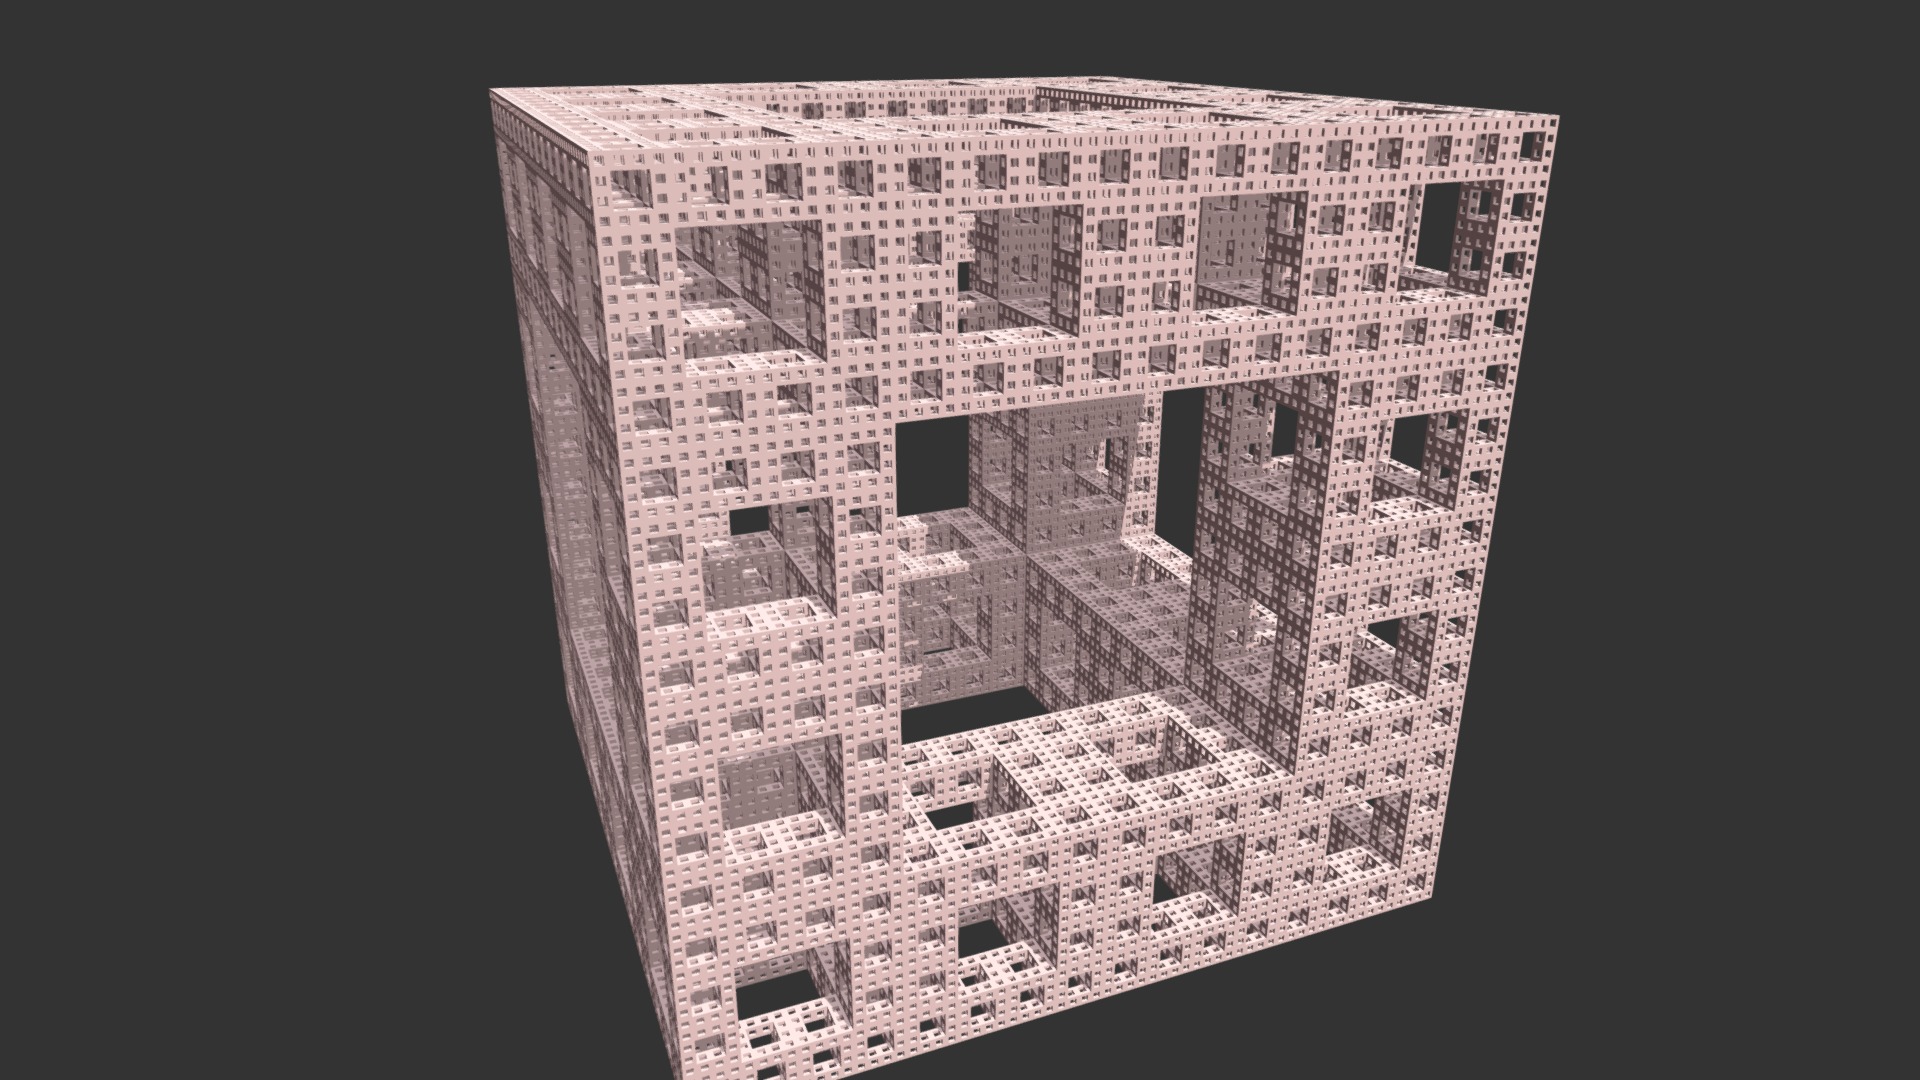 3D model Level 4 Menger Sponge variation - This is a 3D model of the Level 4 Menger Sponge variation. The 3D model is about a stone building with a square hole in the middle.